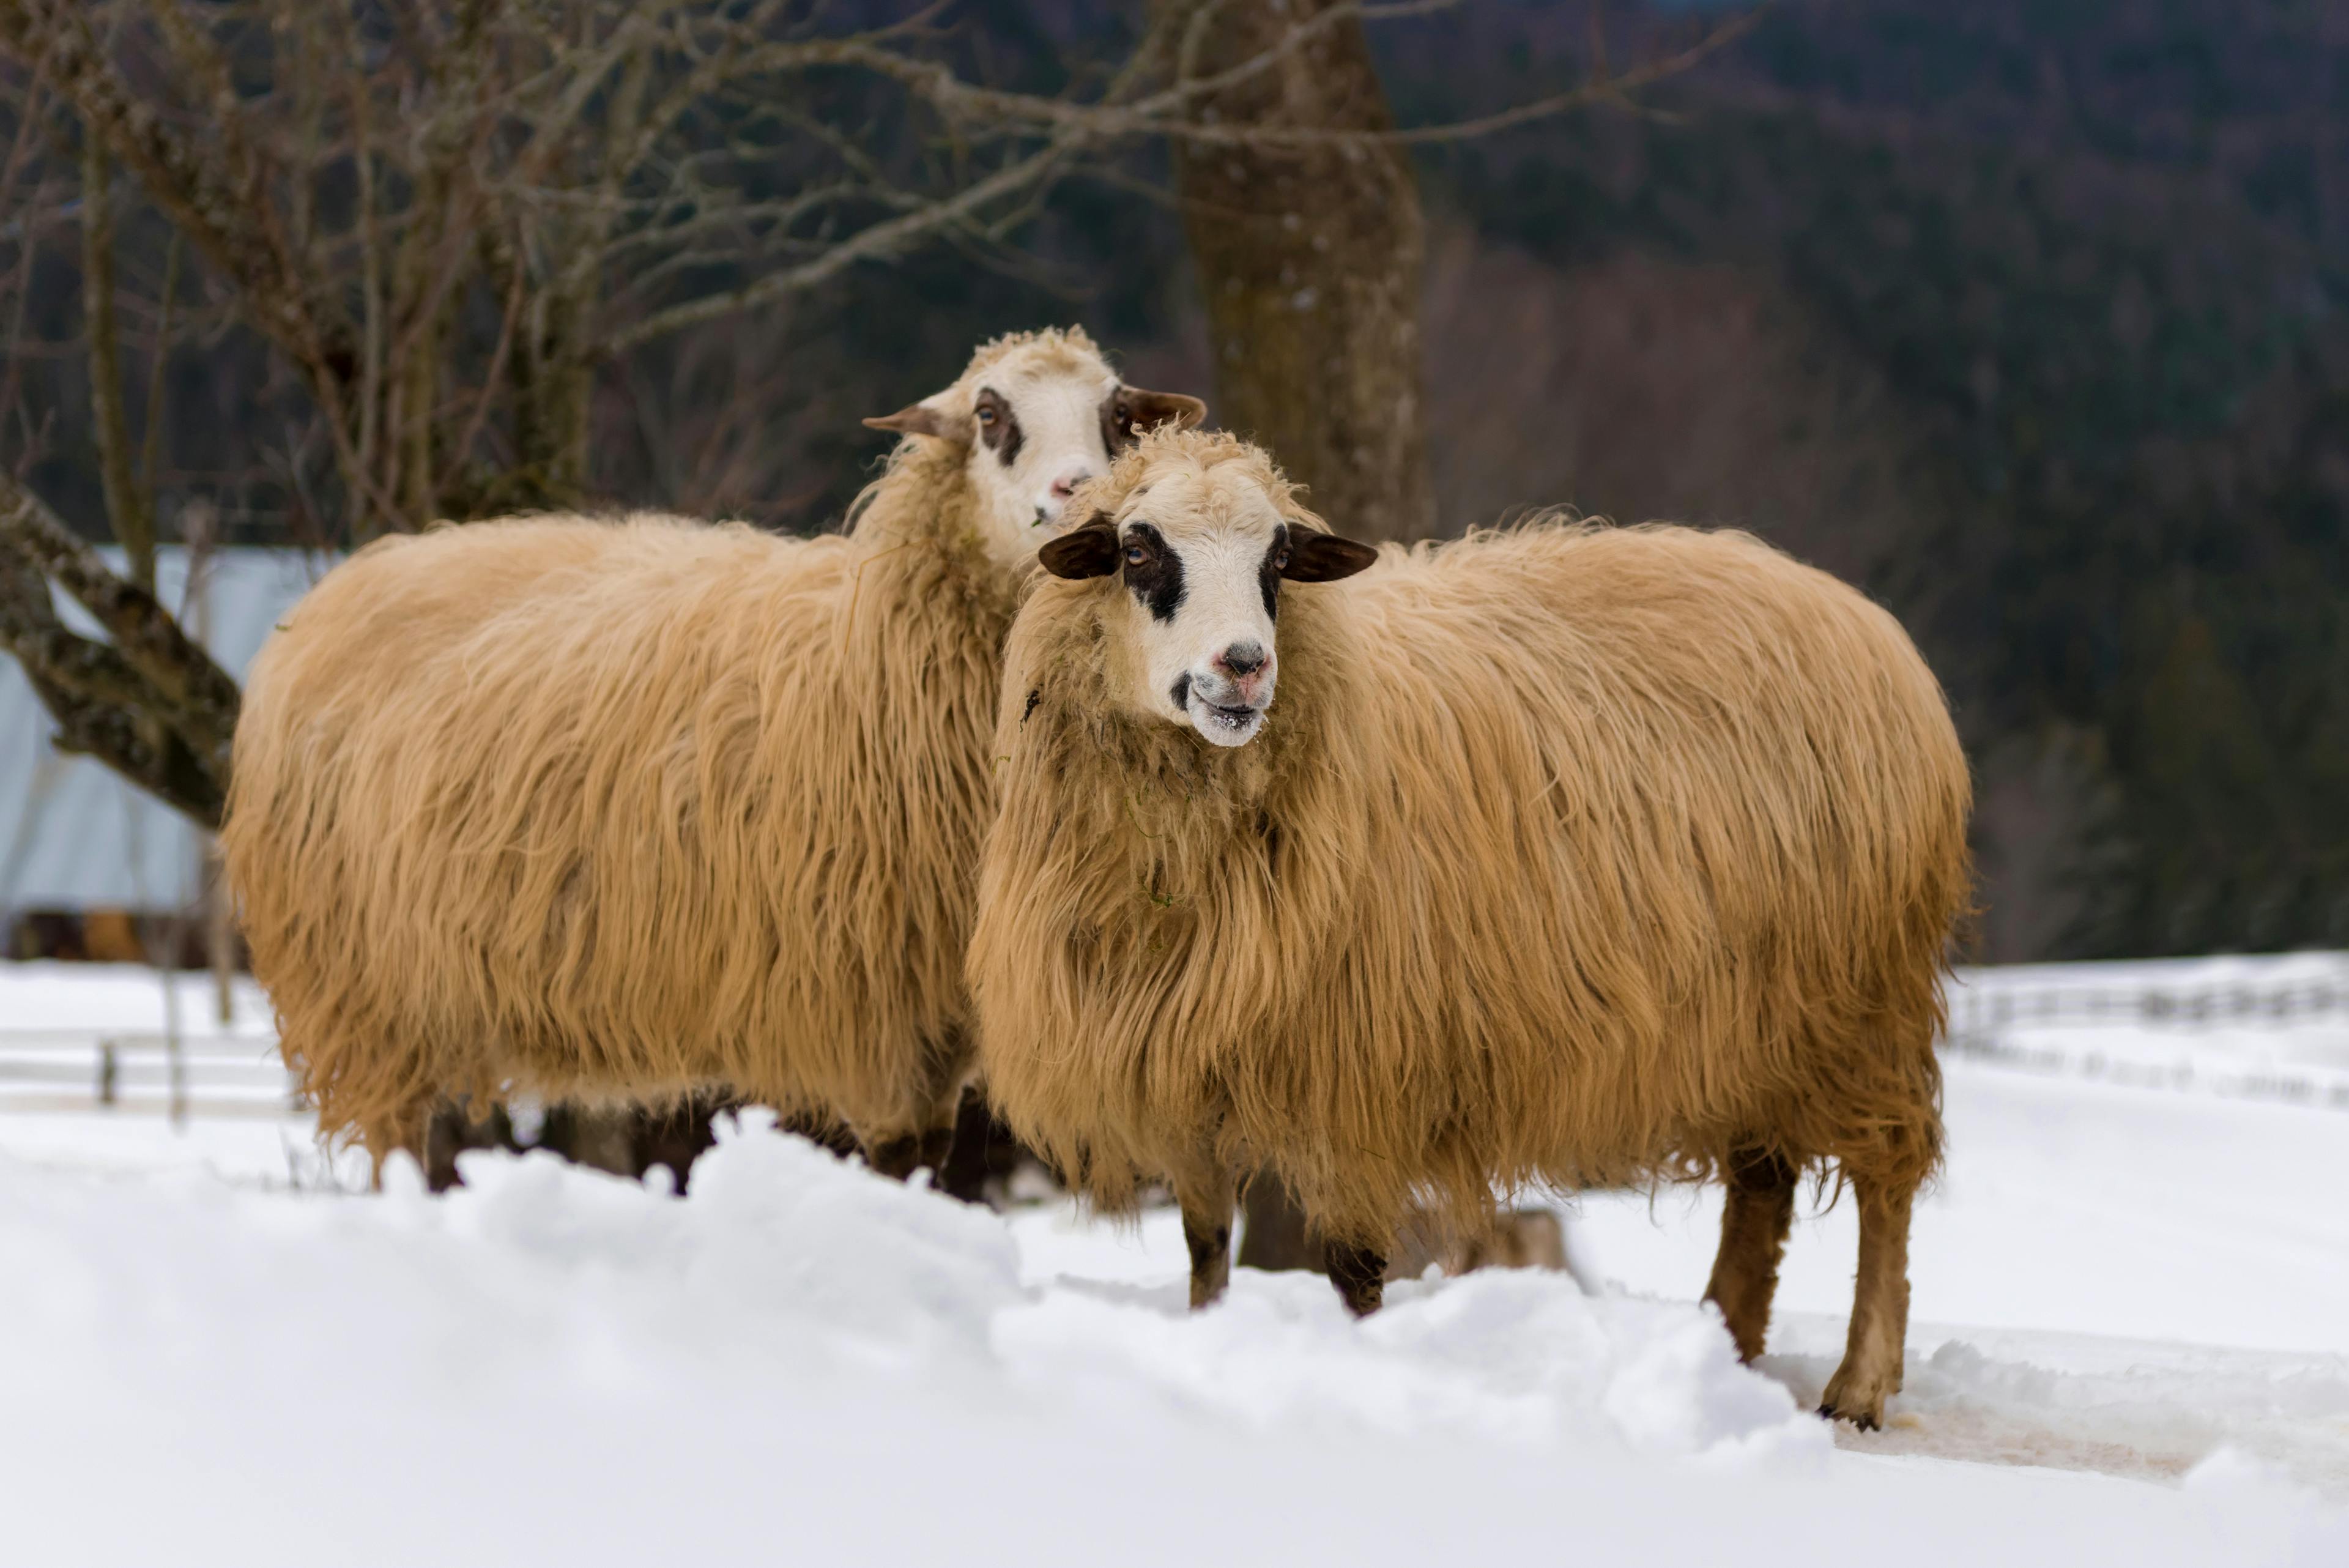 Image of two sheep standing in a snow field.